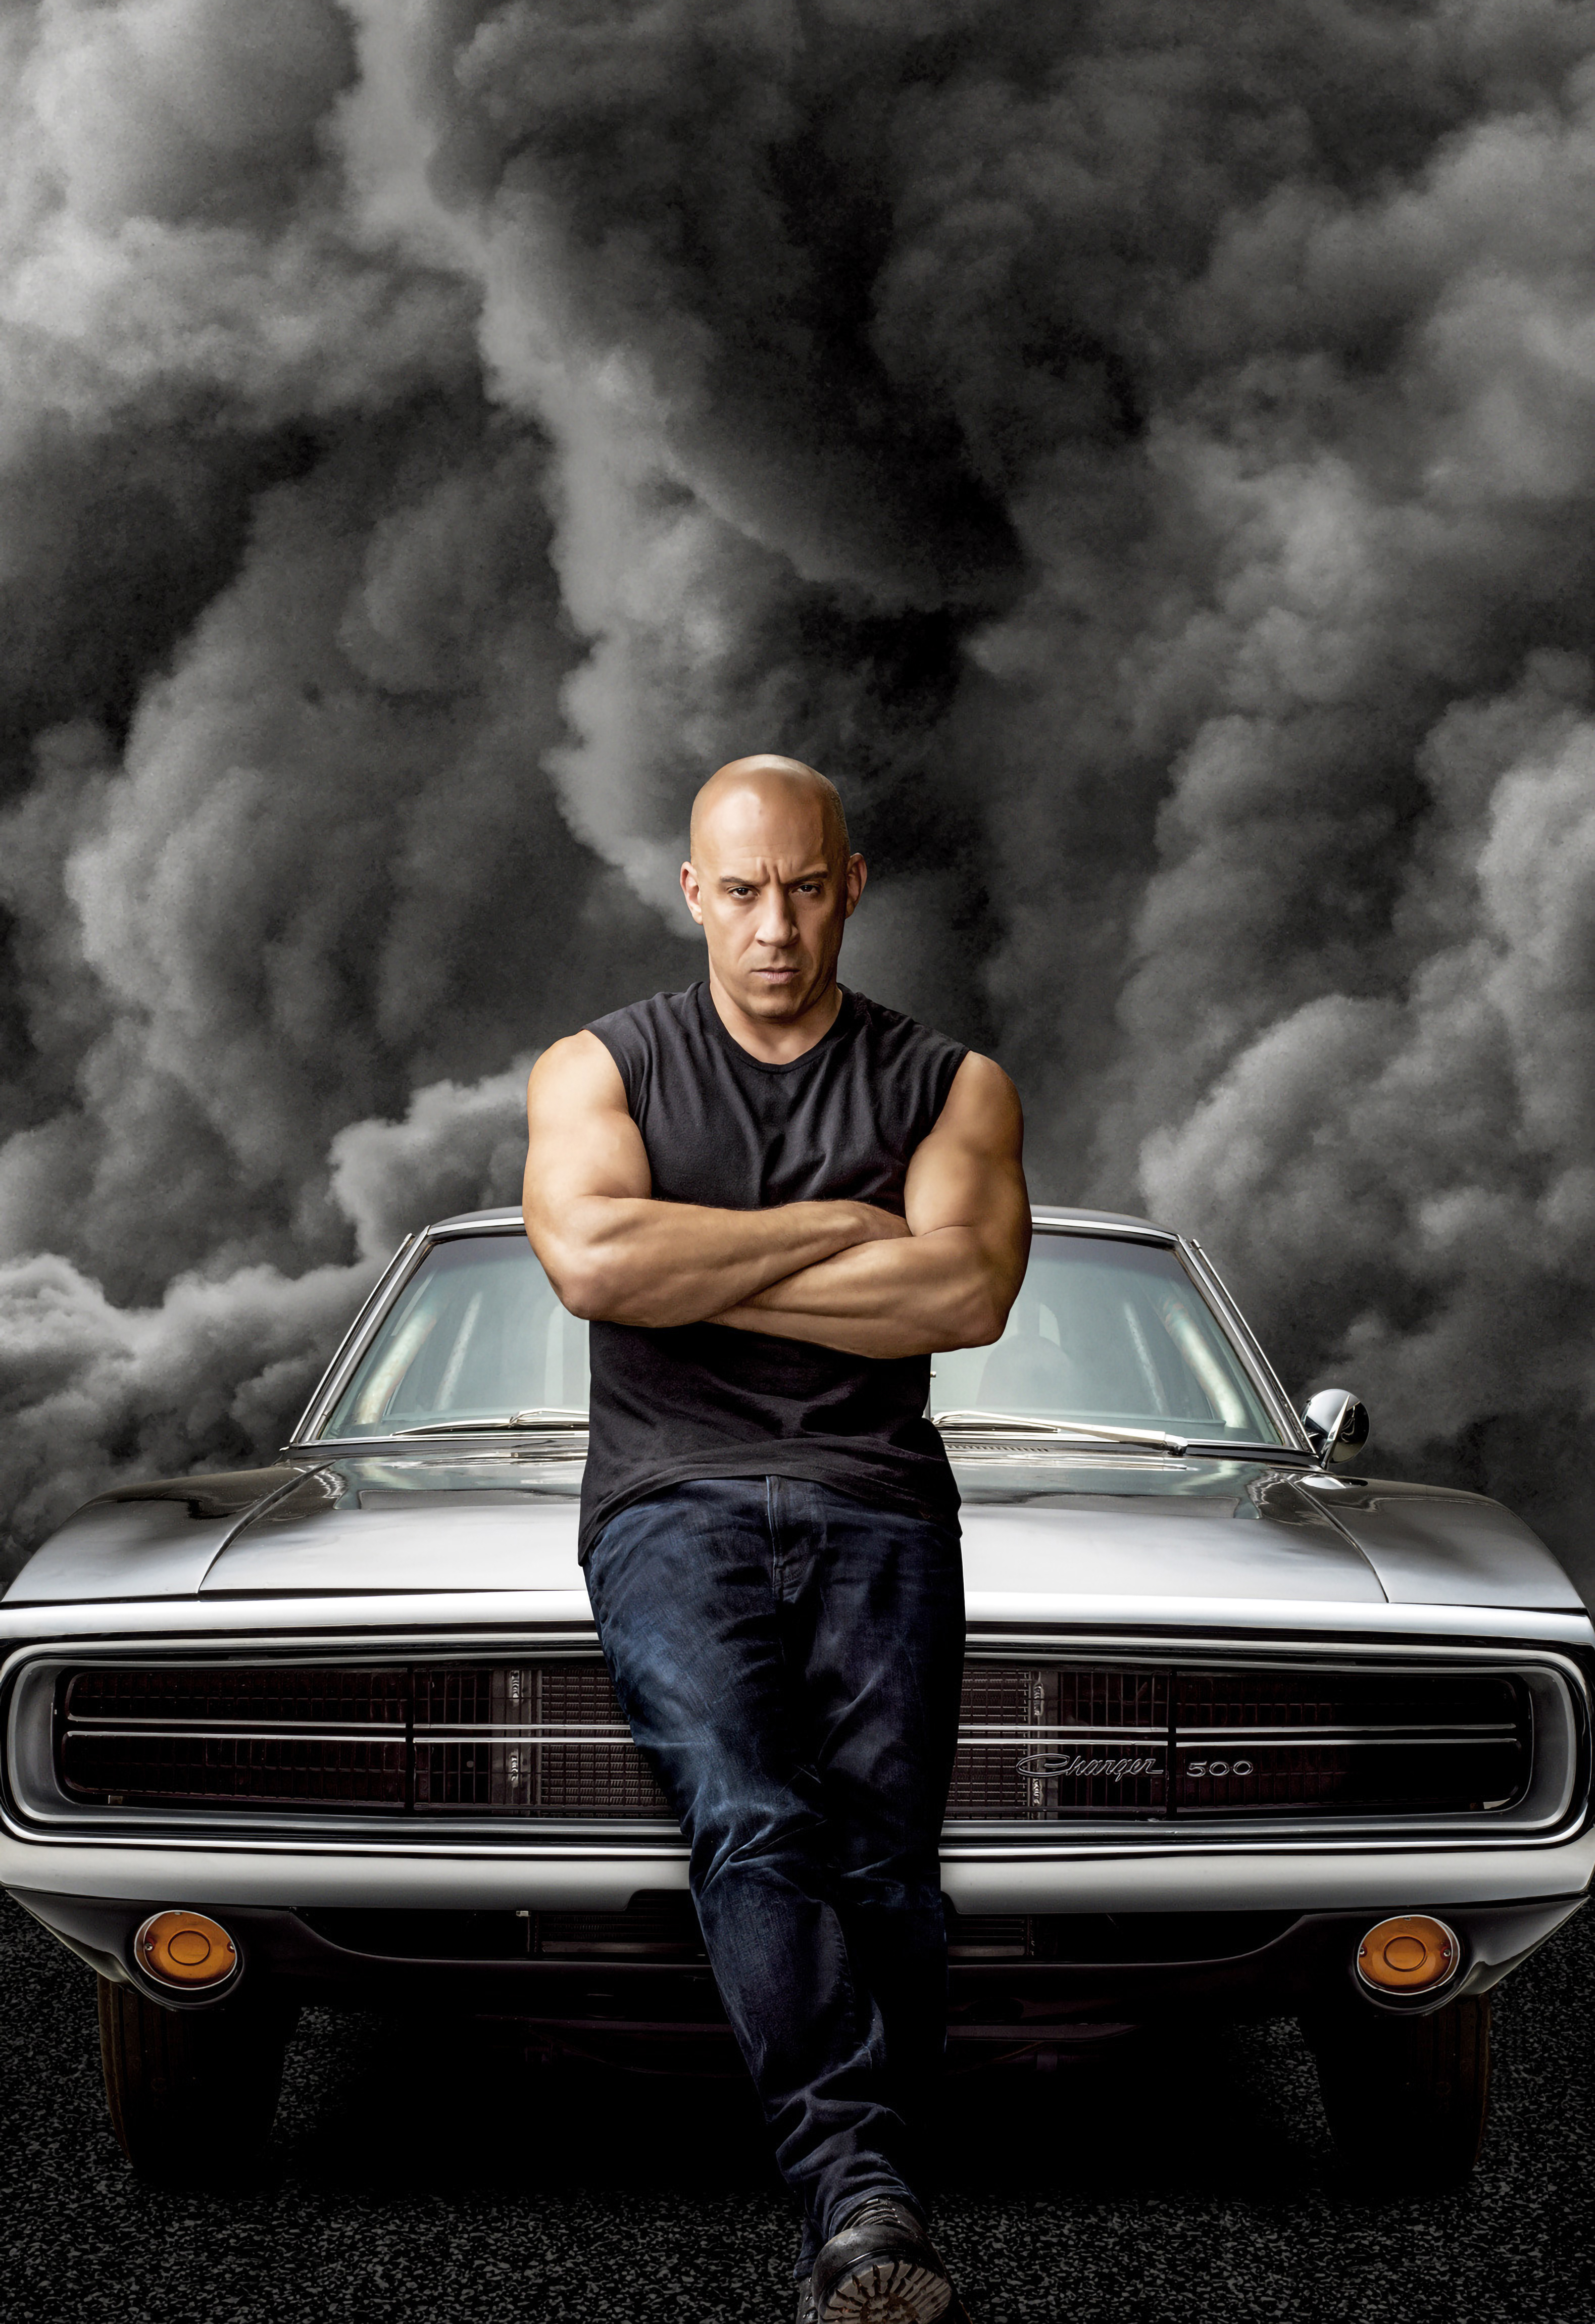 Dominic Toretto - Fast & Furious 6 [2] wallpaper - Movie wallpapers - #19131